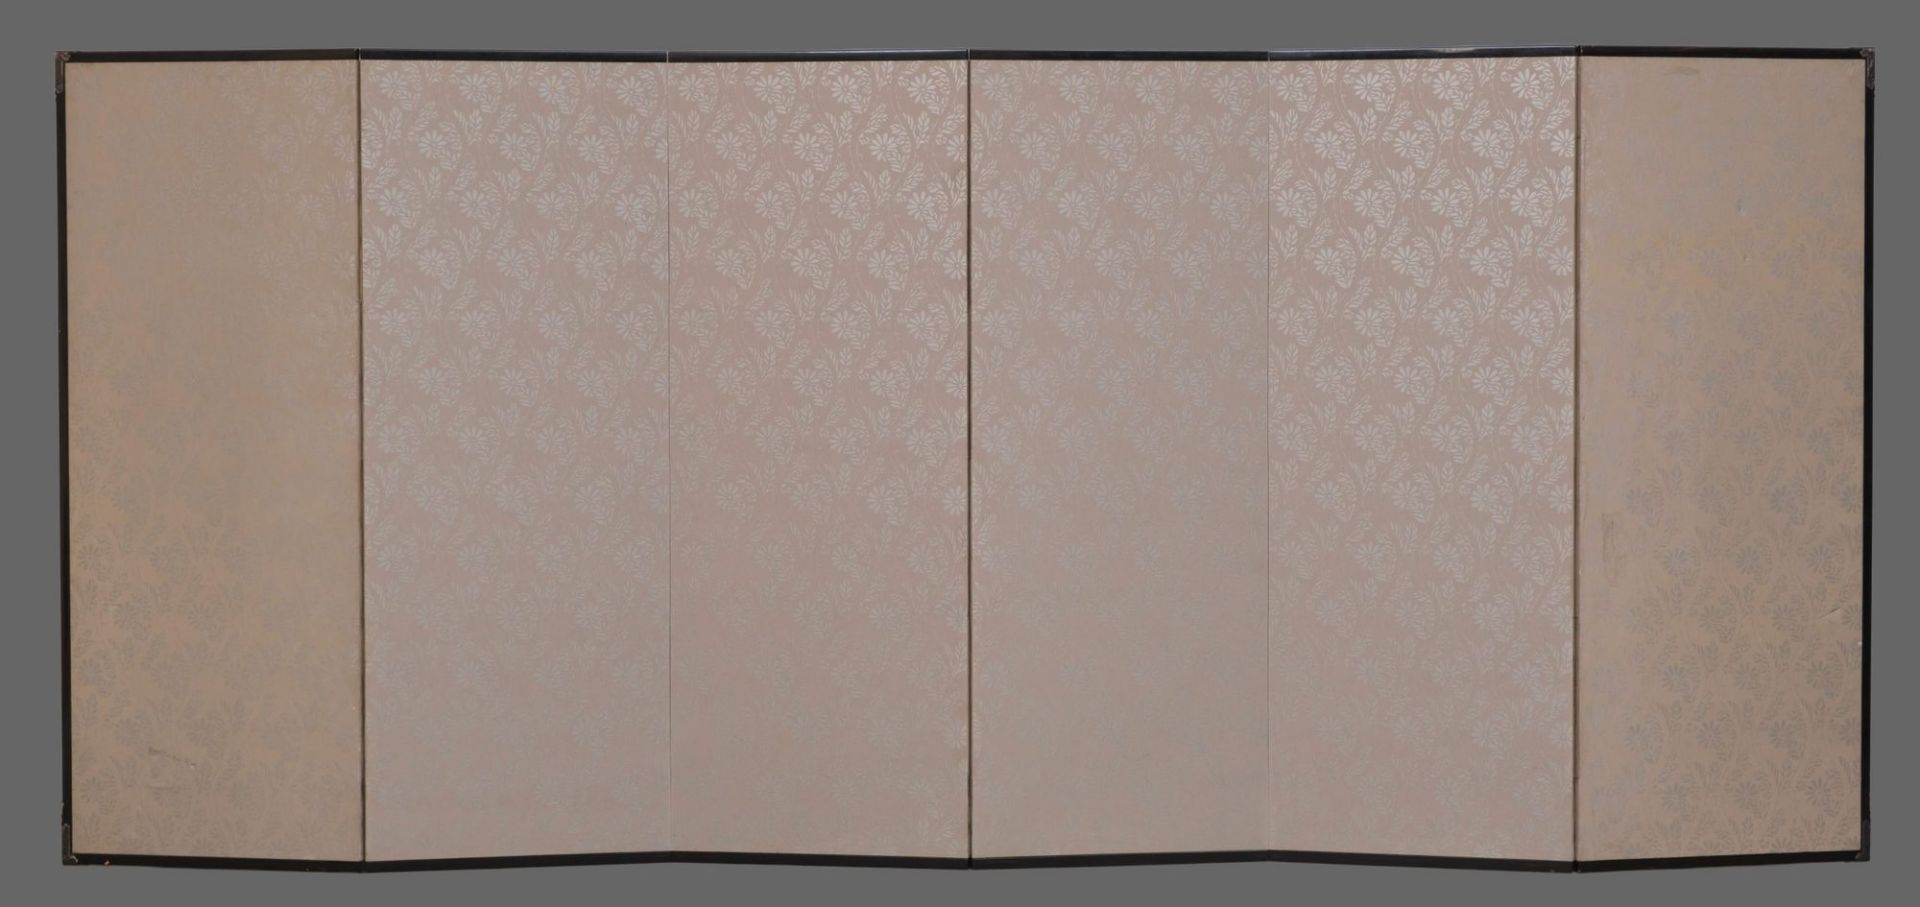 A JAPANESE MID-SIZE 6-PANEL RINPA STYLE BYÔBU (FOLDING SCREEN) WITH CRANES, FIRST HALF 20TH CENTURY - Image 13 of 13